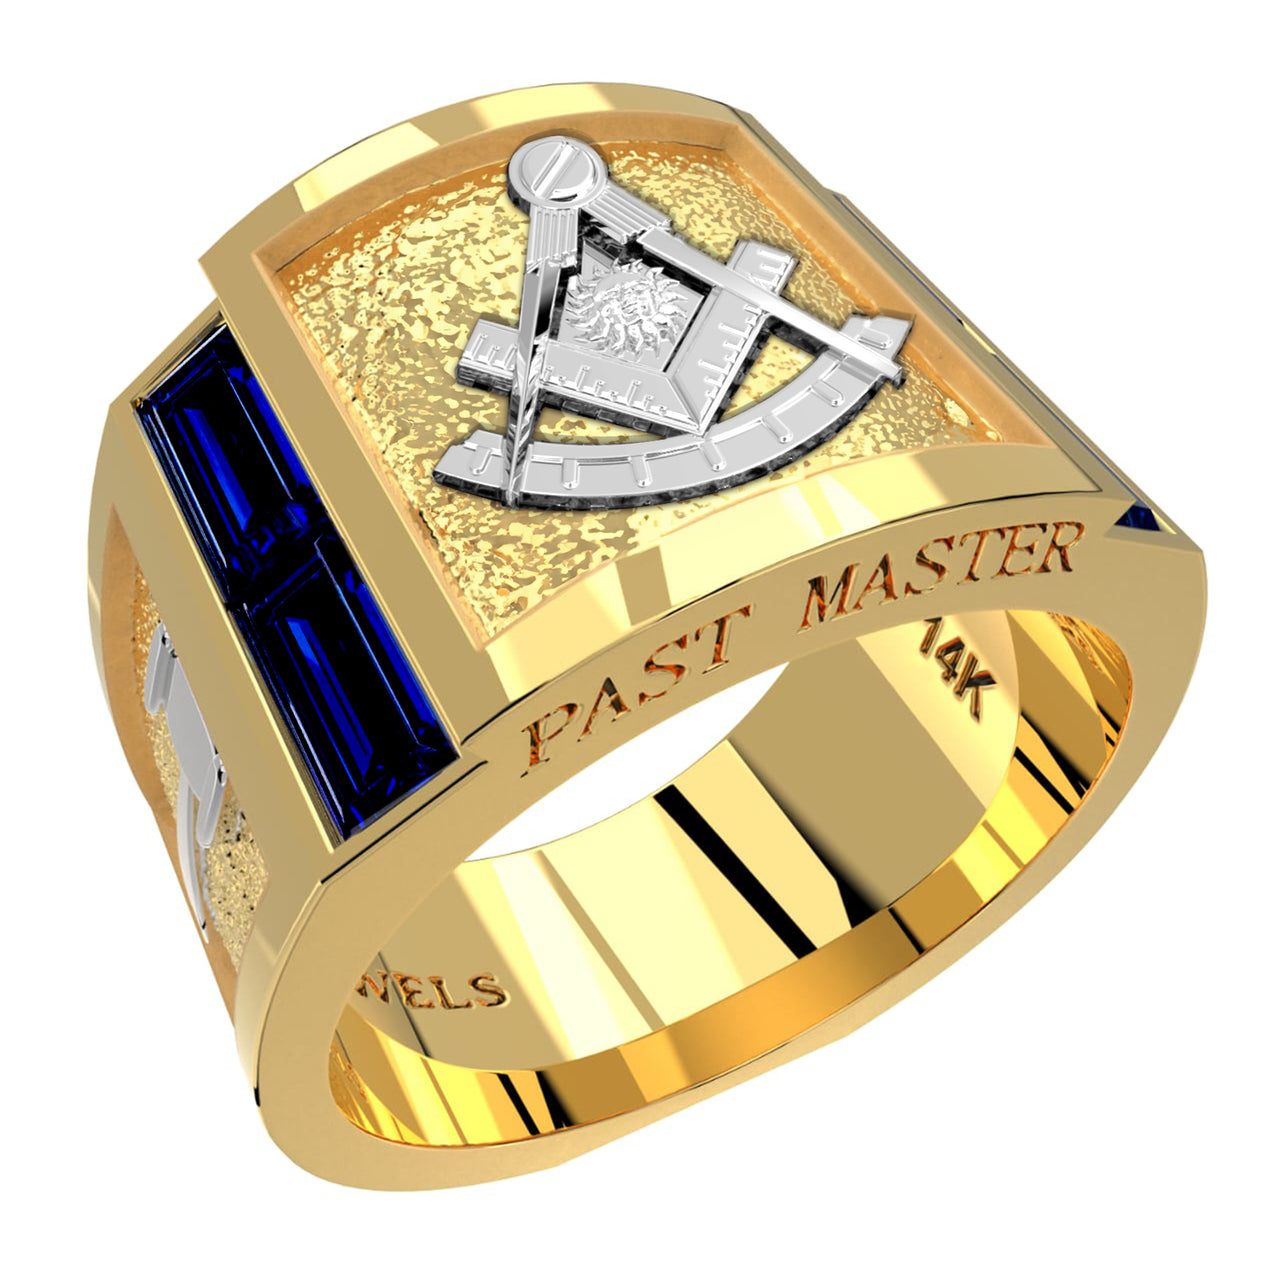 Men's Heavy Solid 10K or 14K Yellow Gold or White Gold Freemason Past Master Ring Band